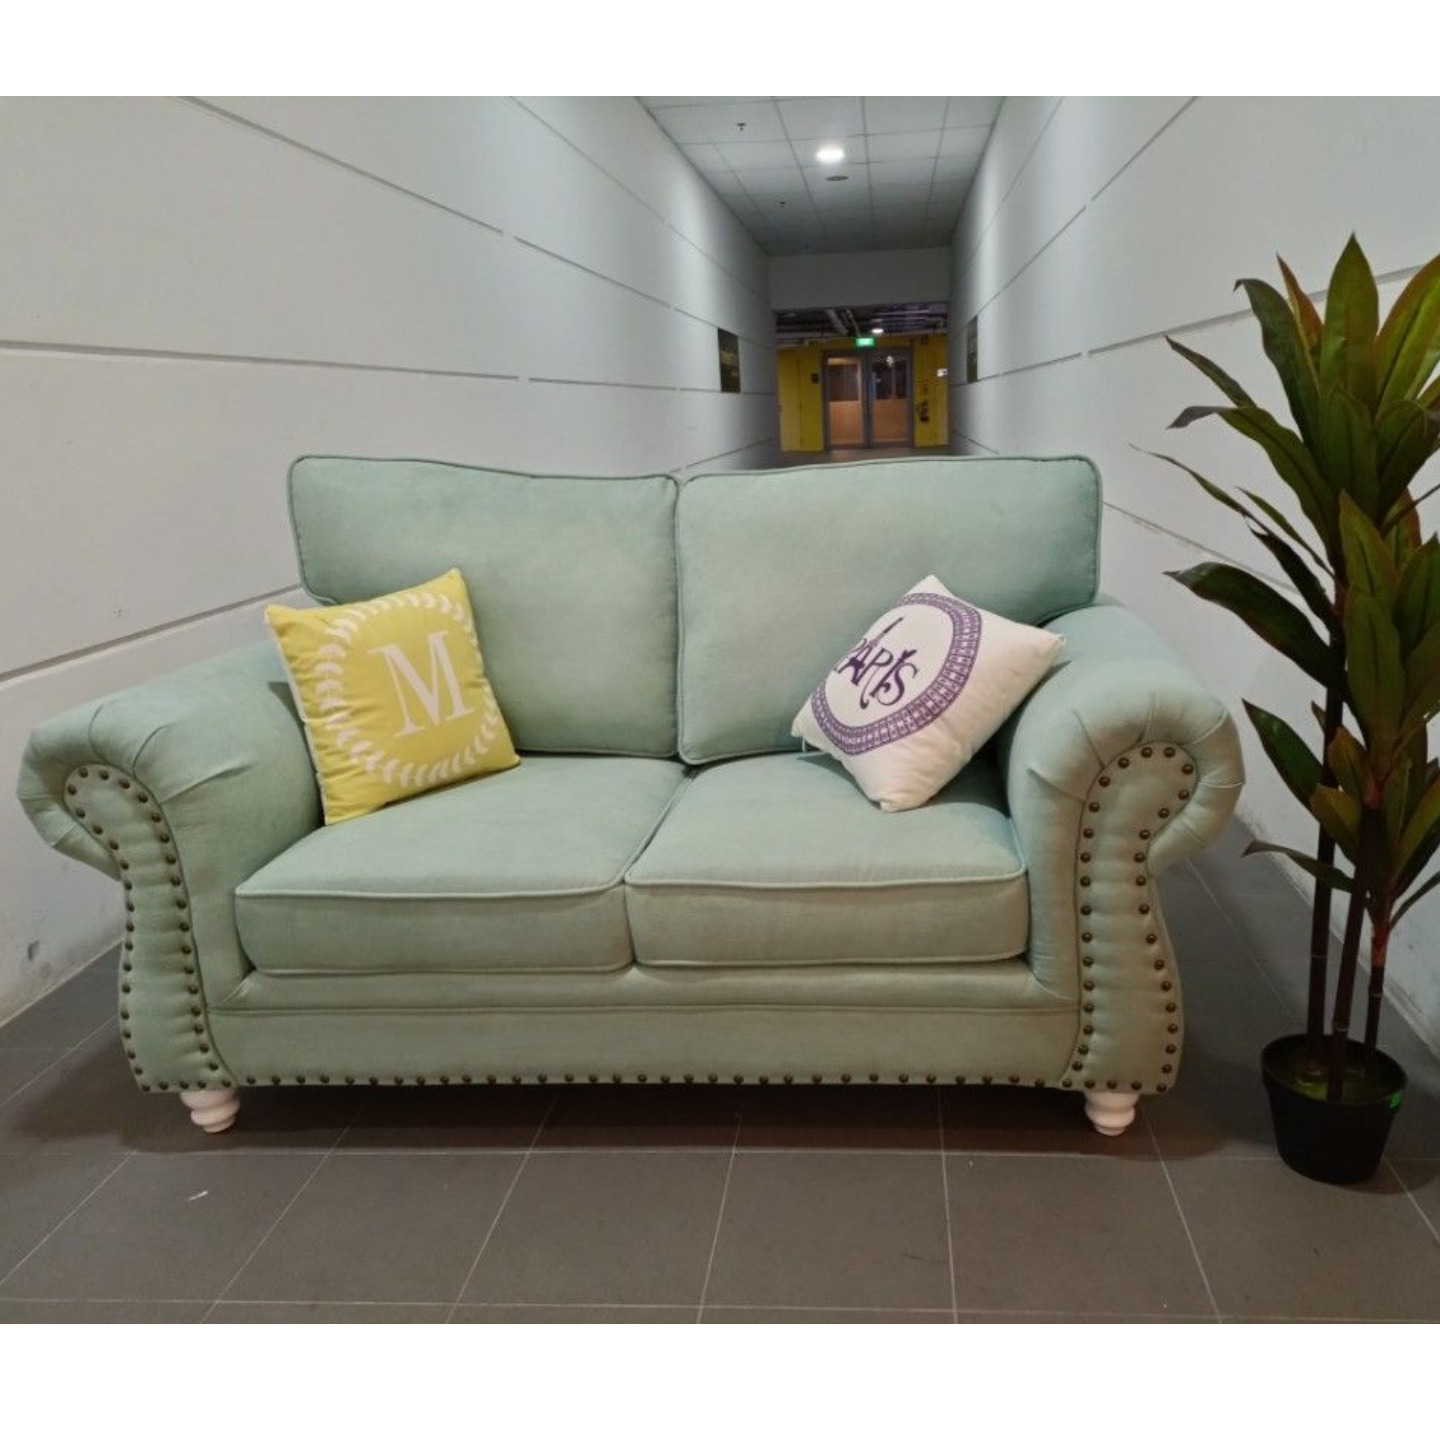 VALENTORA II 2 Seater Chesterfield Sofa in MINT GREEN FABRIC